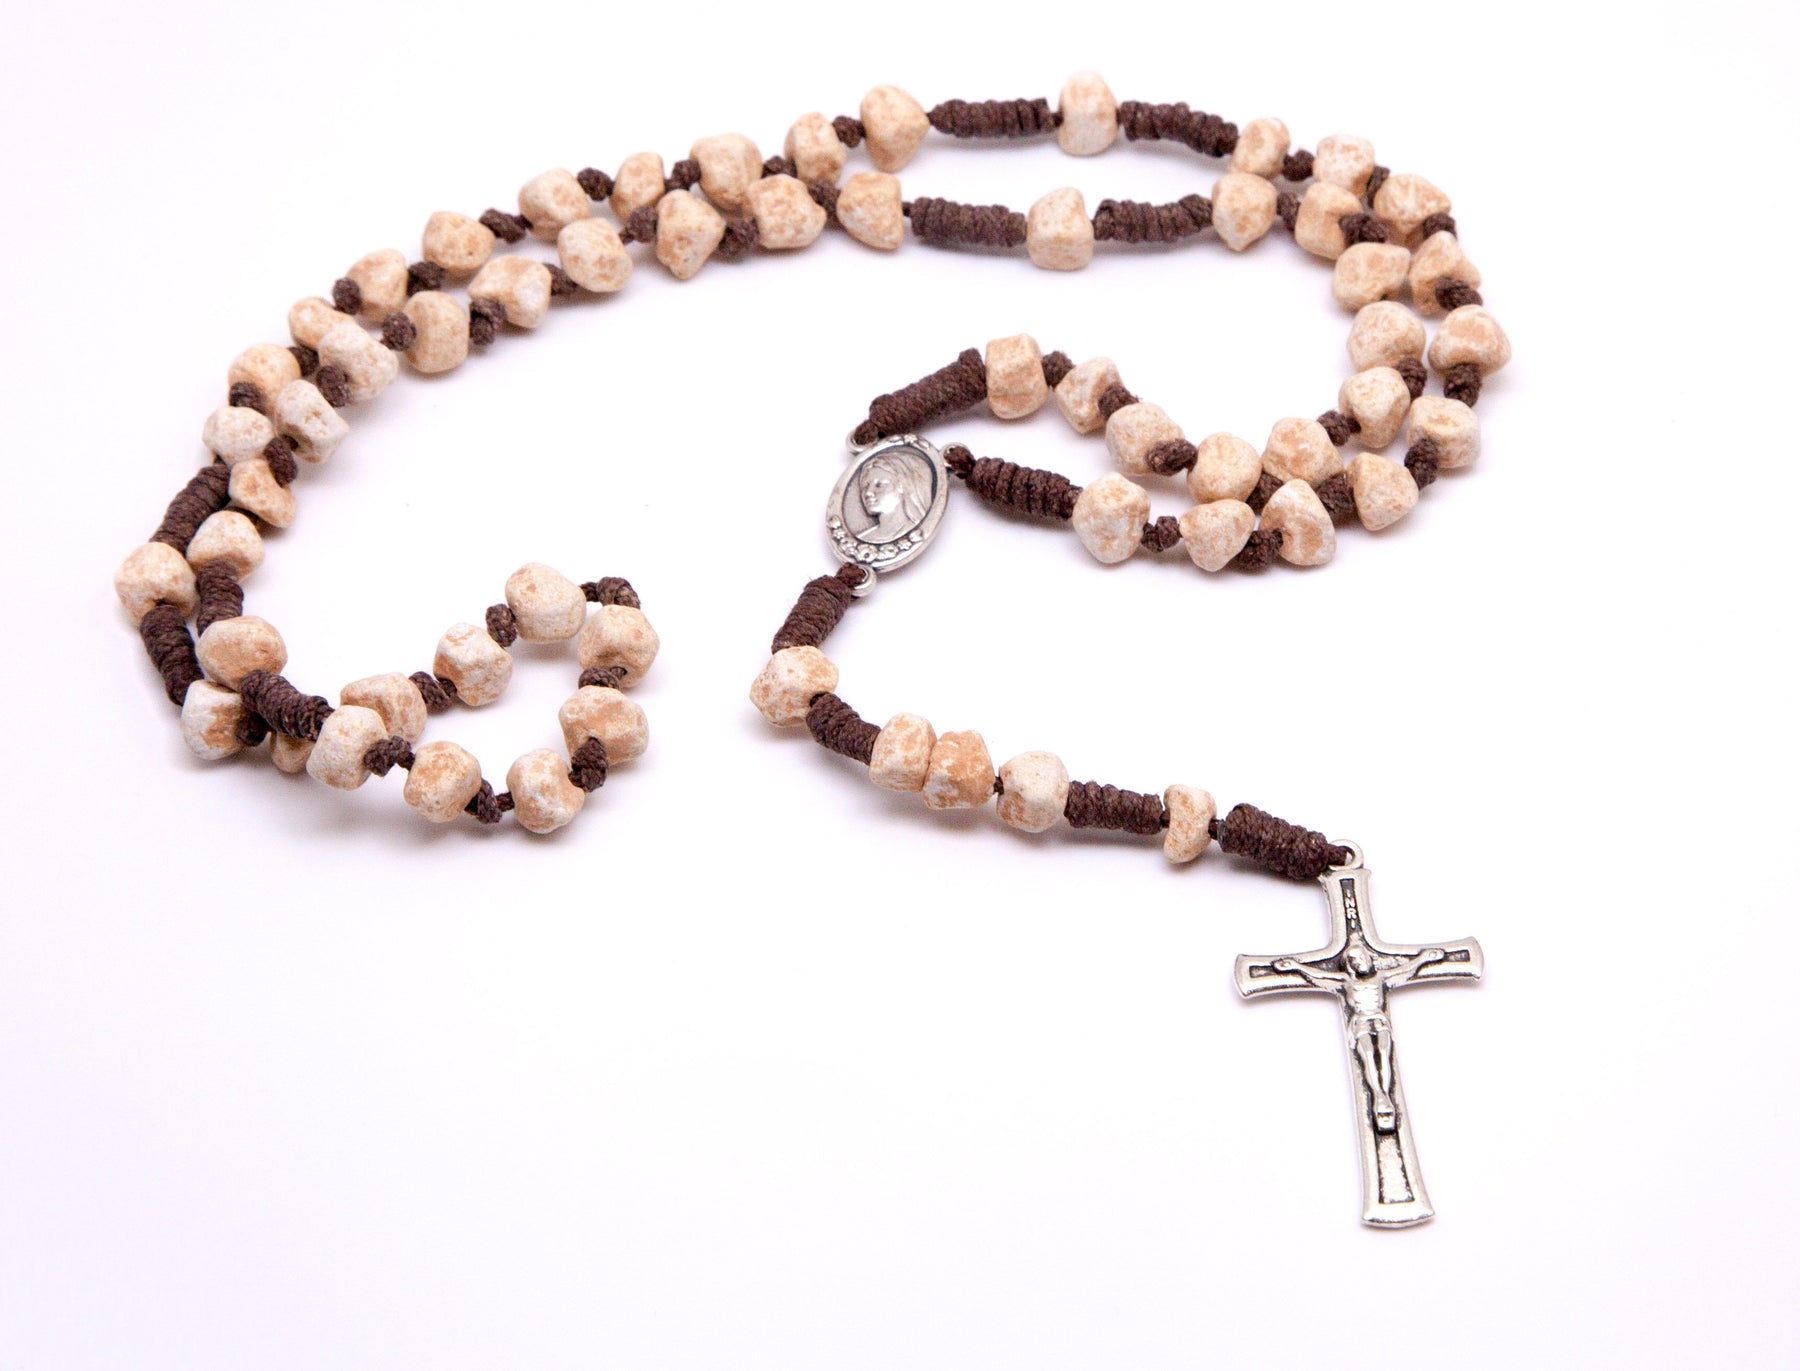 Medjugorje Stone Rosary- Brown Cord and Unpolished Stones